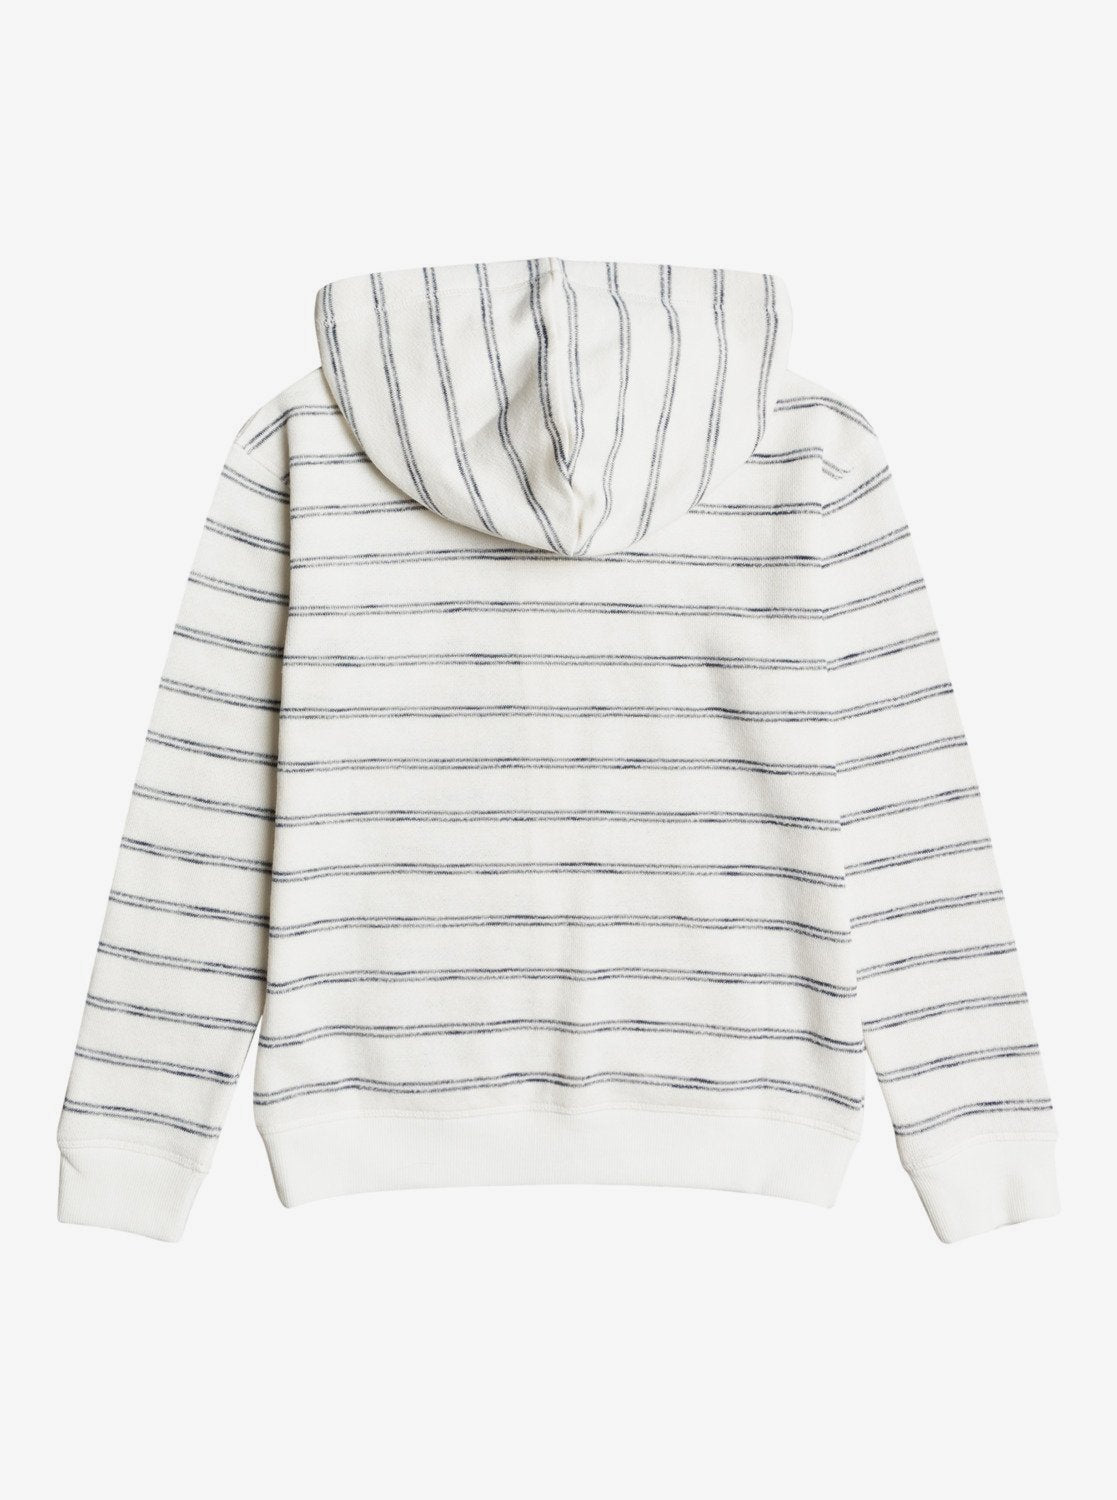 Roxy Girl 'Perfect Wave' Hoodie - Mountain Kids Outfitters